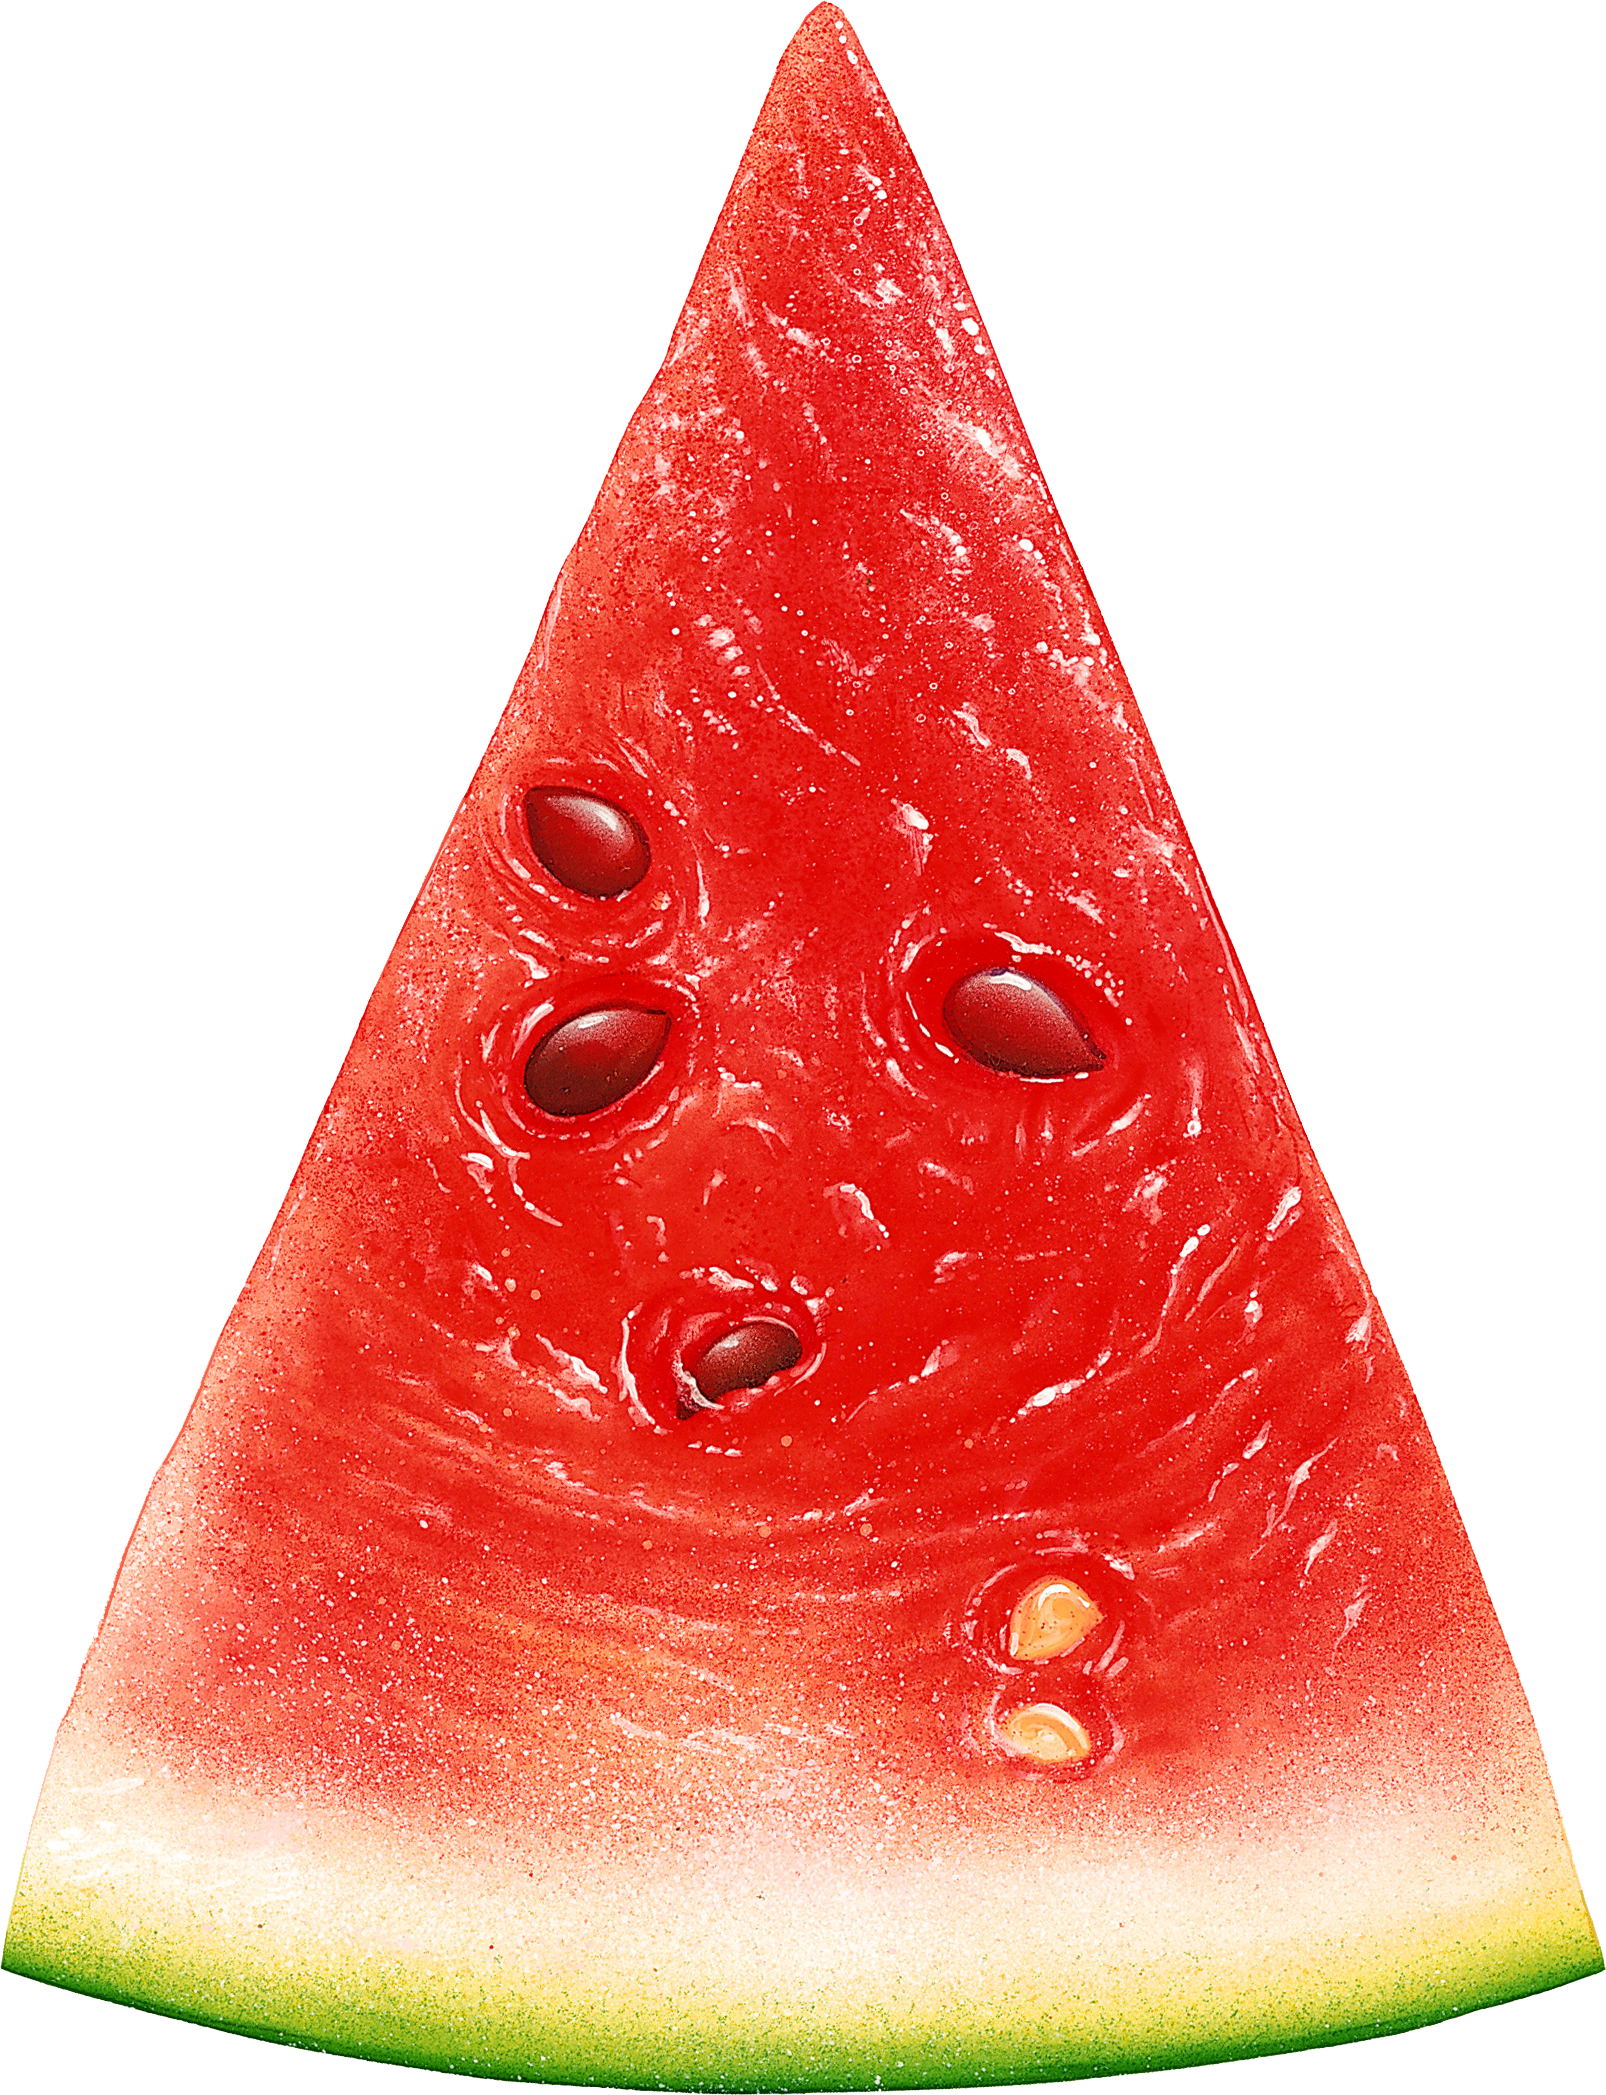 Explore Food Clipart, Fruit Clipart, And More - Watermelon Slice (1606x2095)